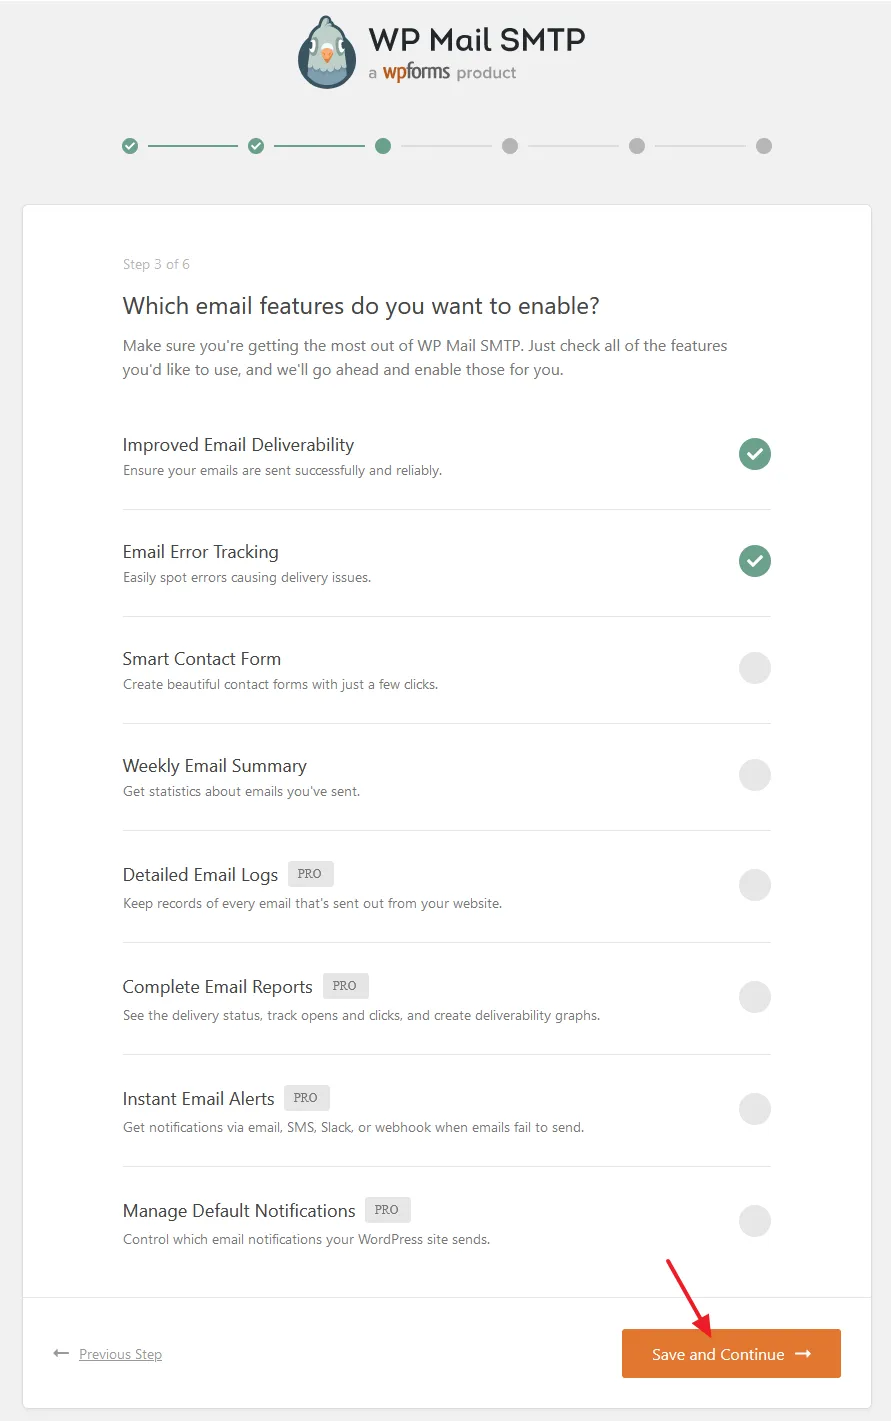 Select the email features that you want to enable. Click on the Save & Continue button.